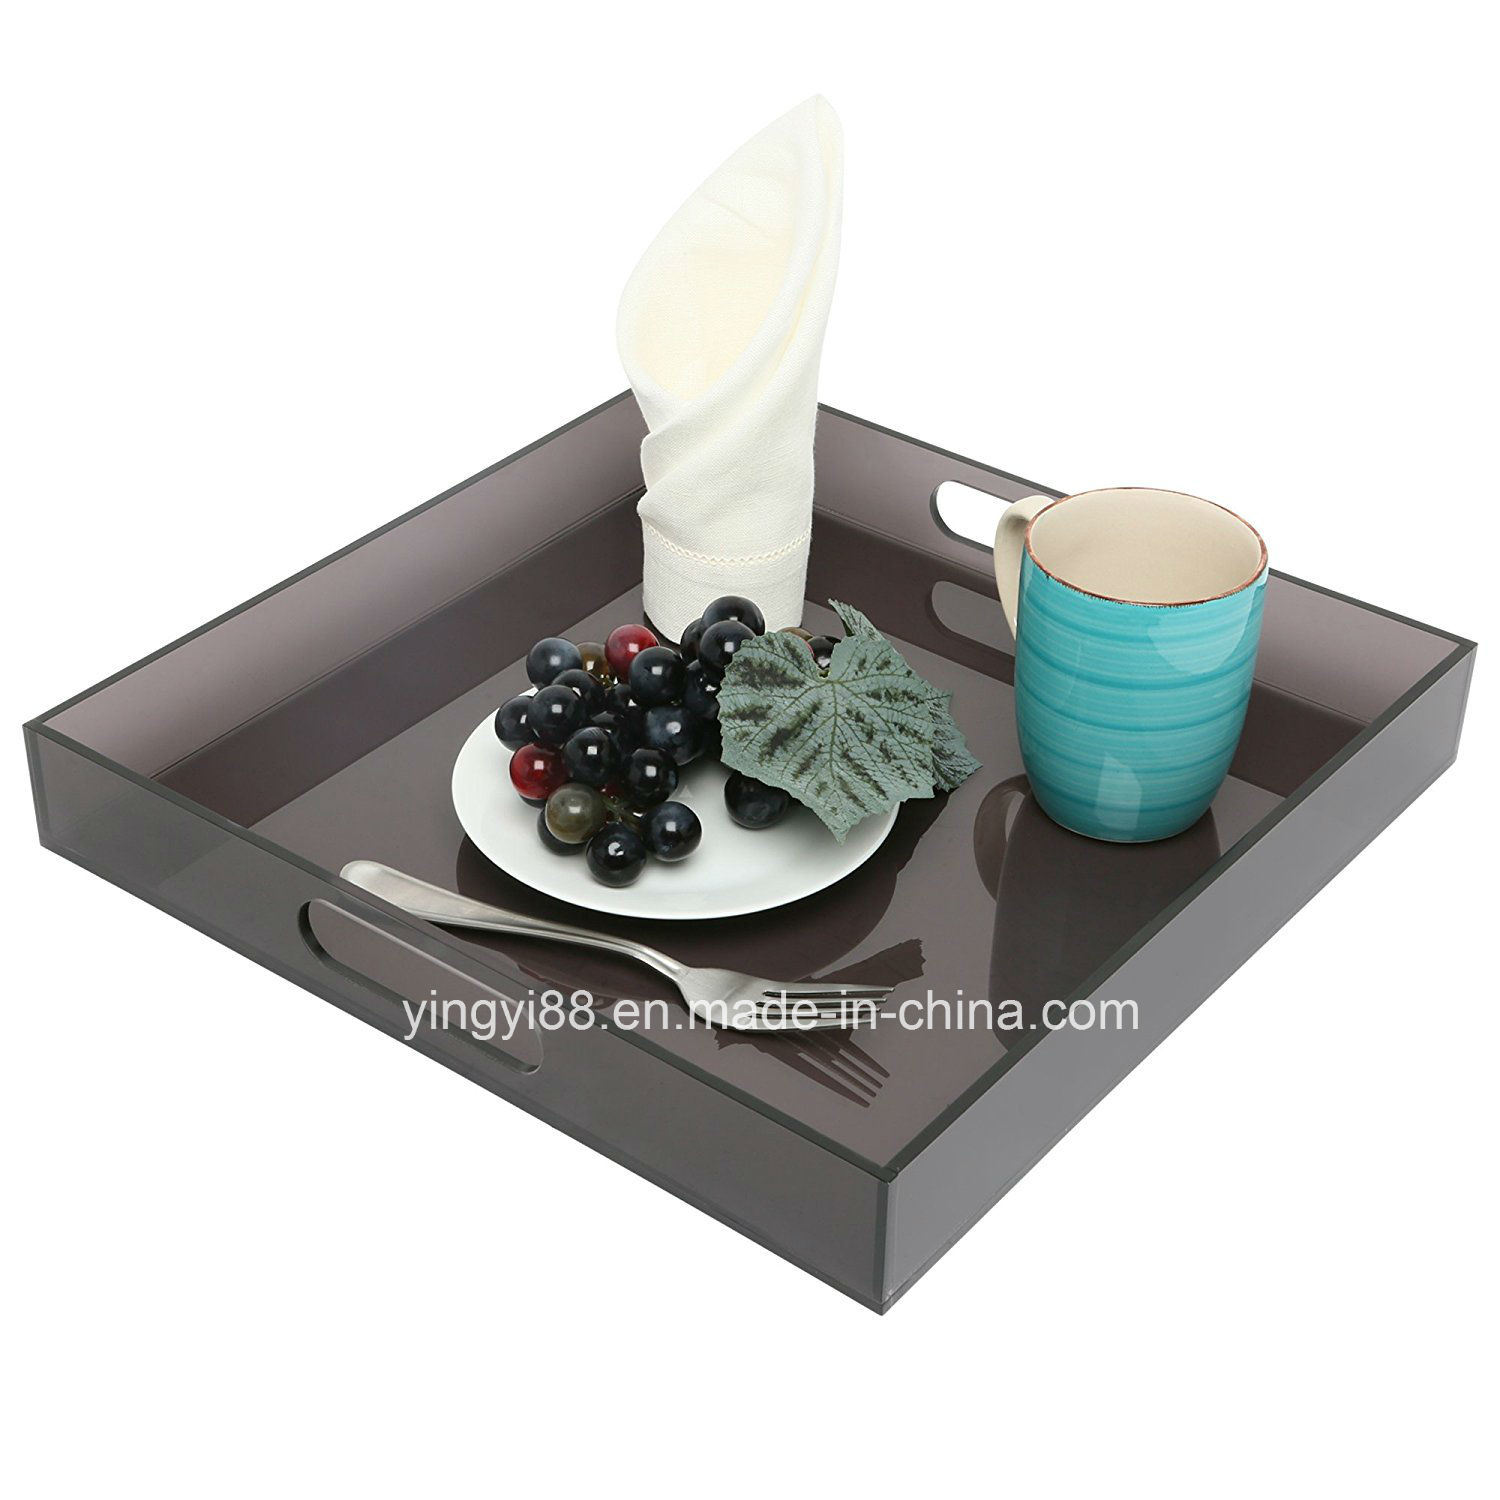 /proimages/2f0j00OFZQPvcsZYgt/2018-spill-proof-acrylic-party-serving-tray-with-handles.jpg